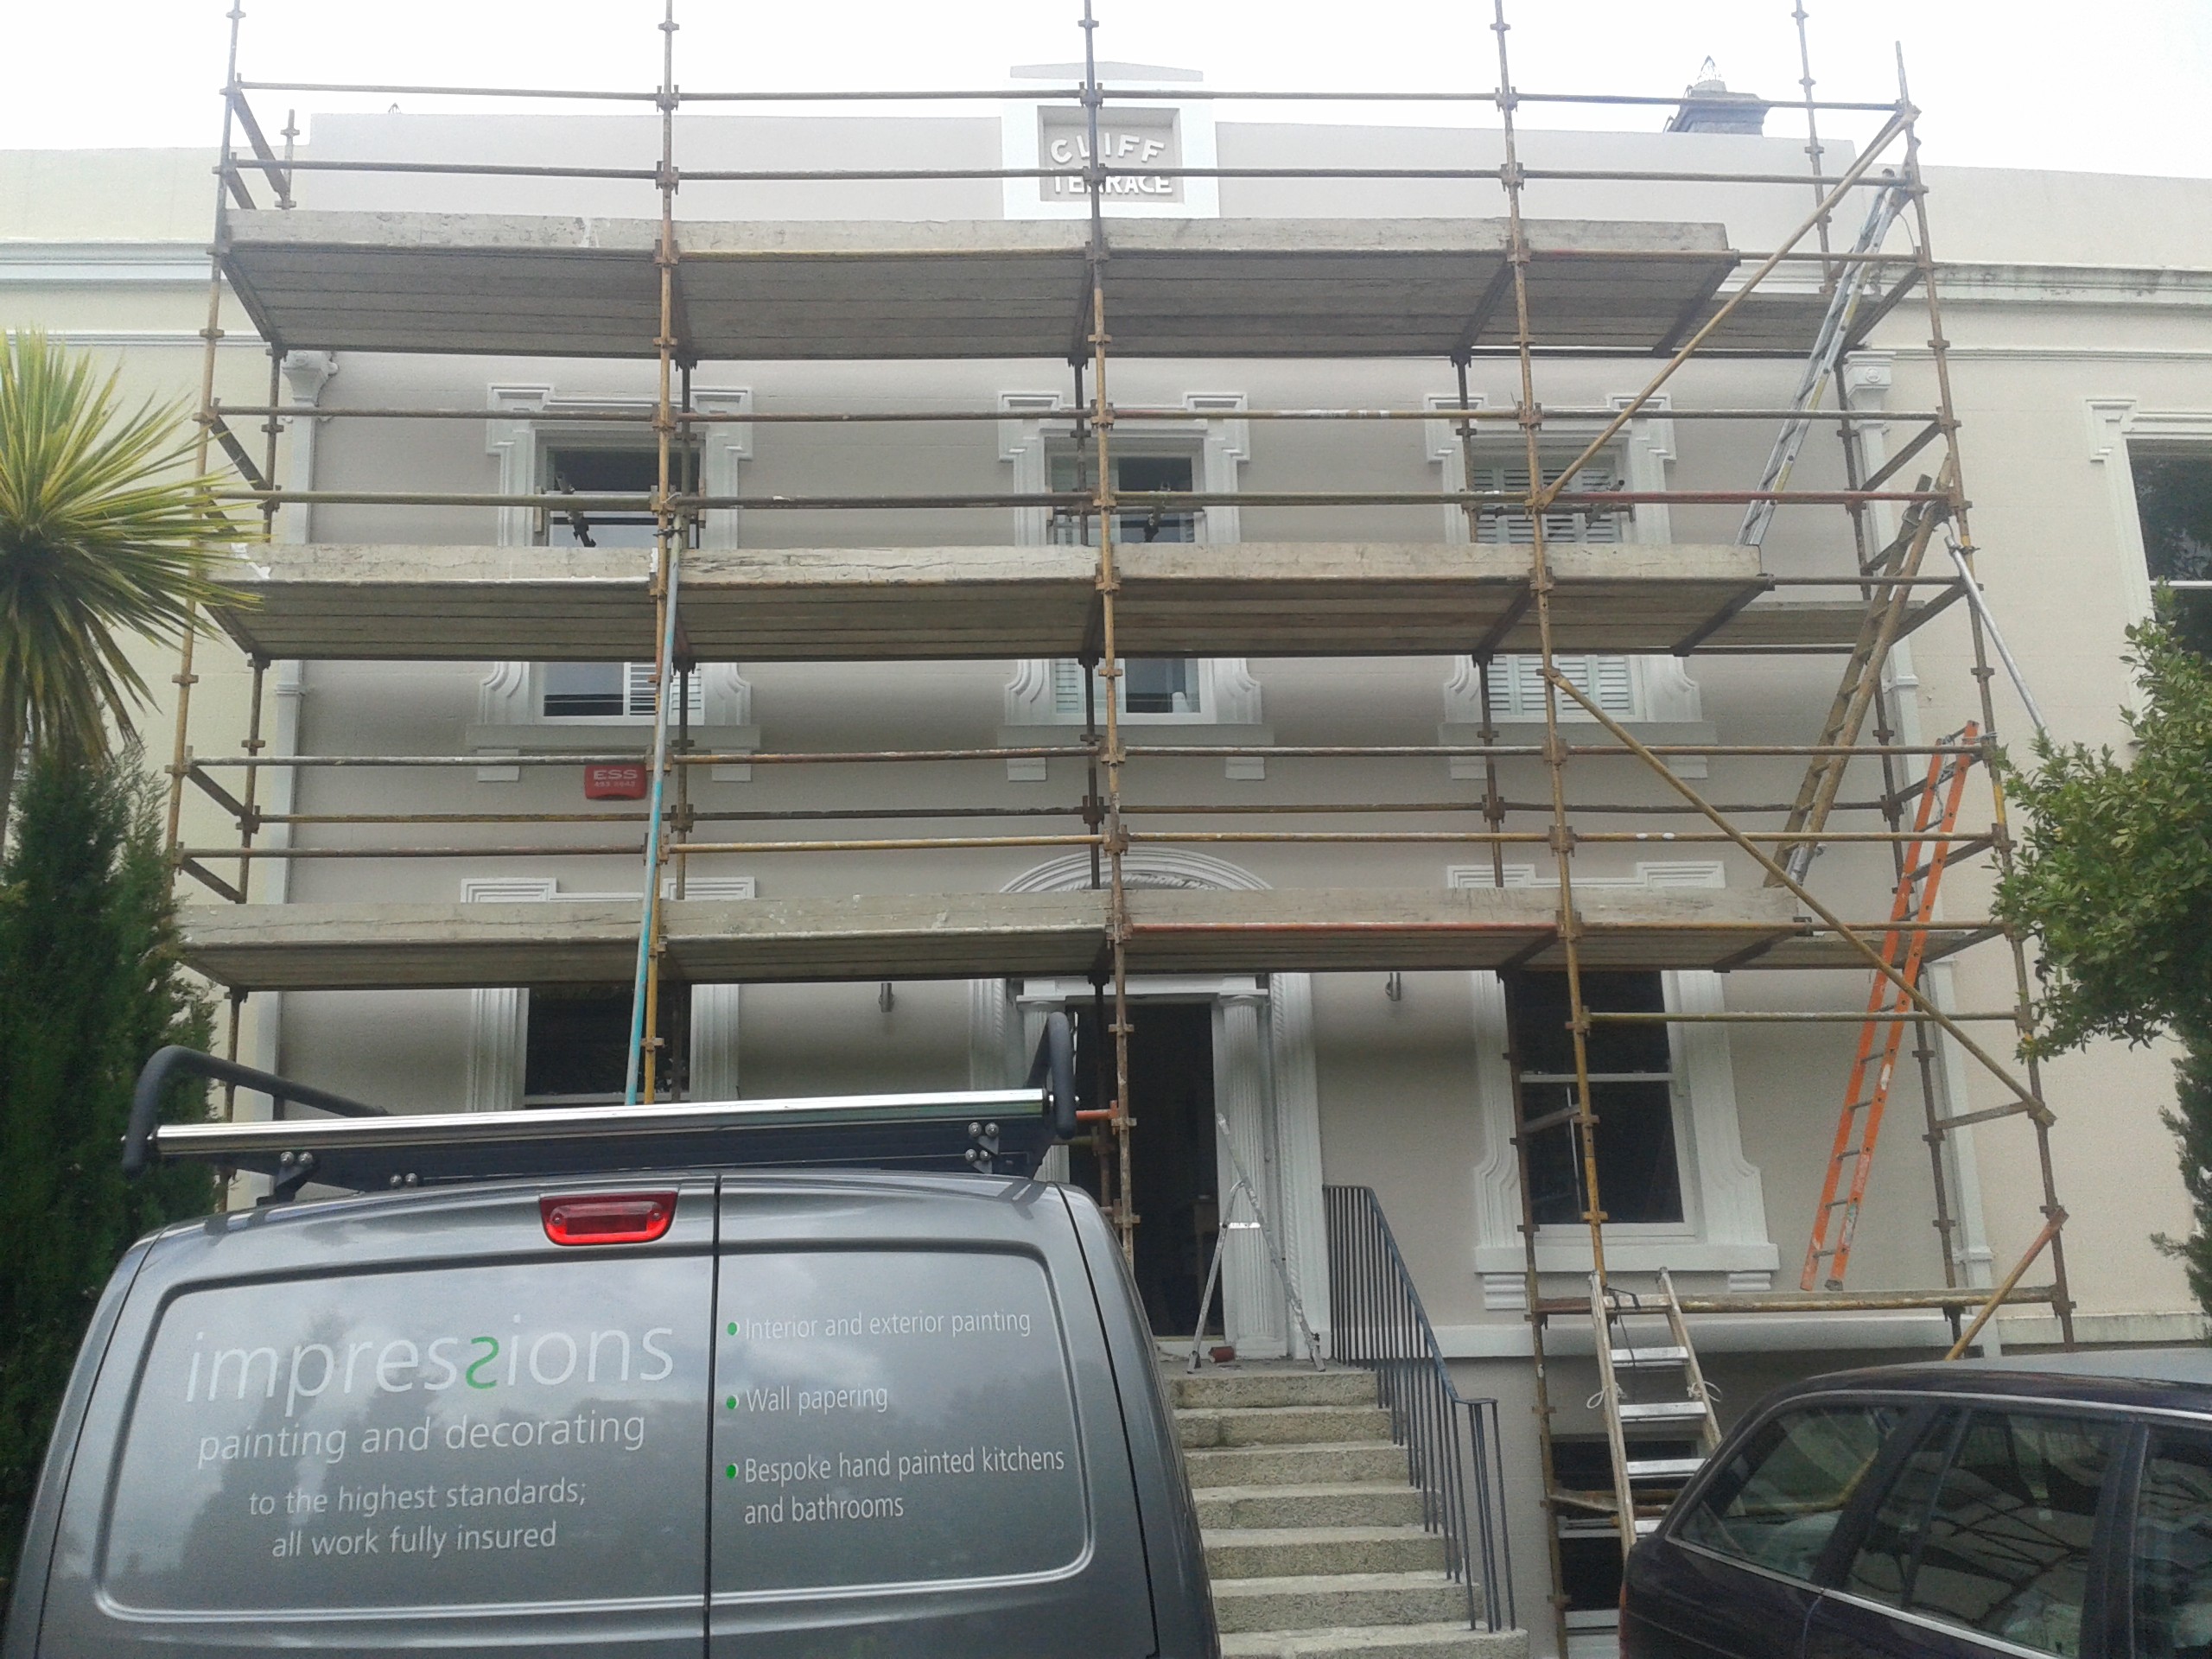 When is scaffolding necessary for painting the exterior of a house blog by Impressions Painting and Decorating